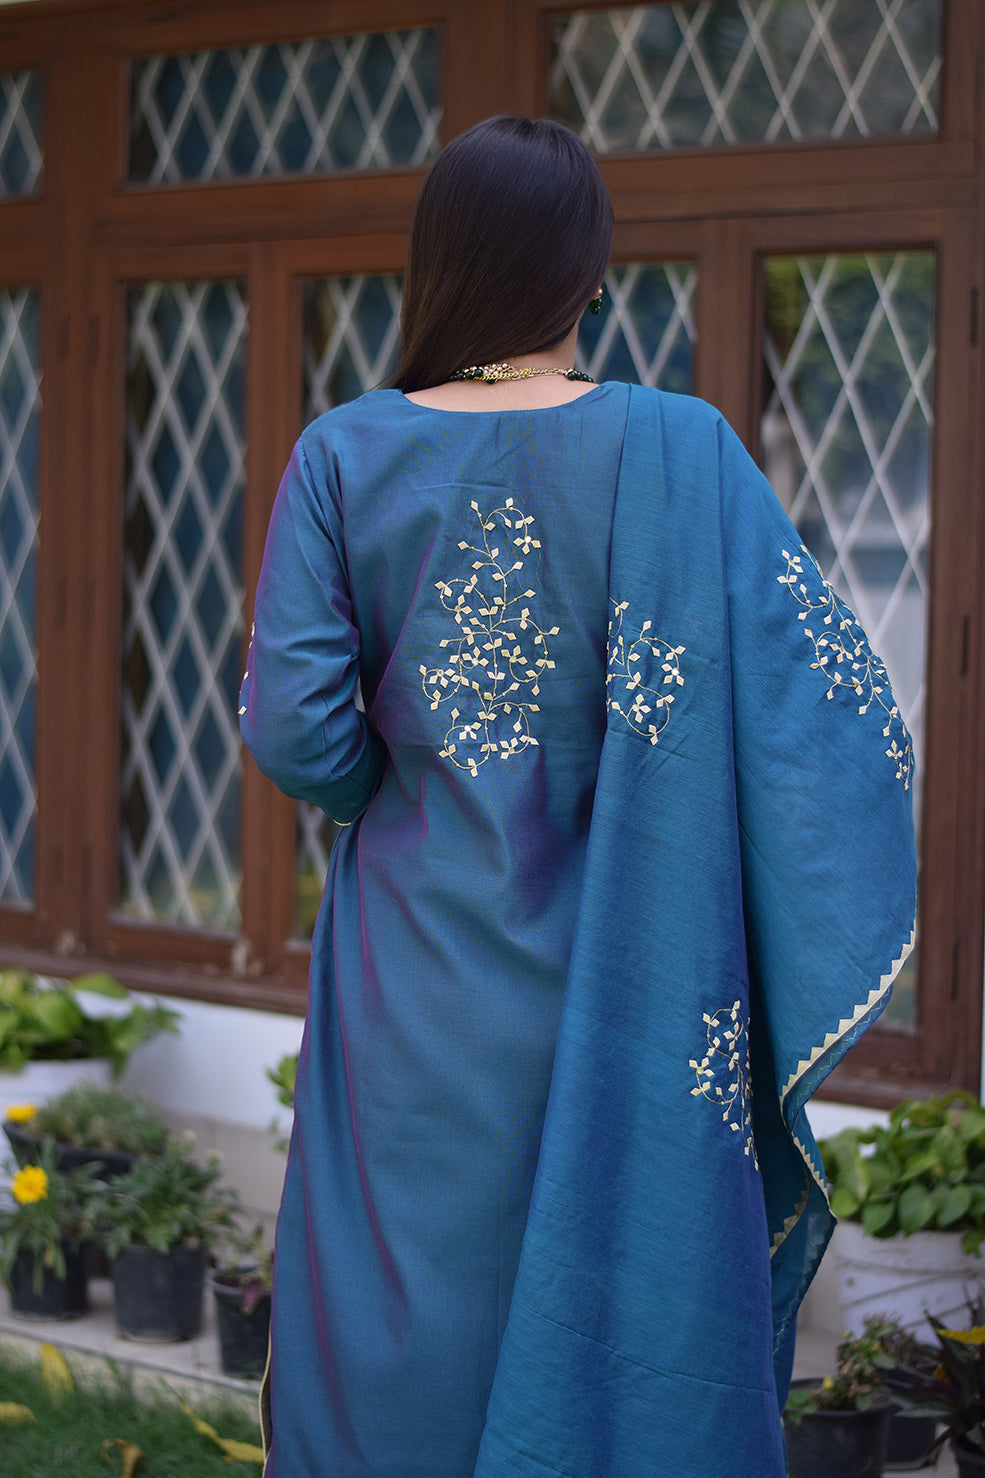 An attractive Indian woman dressed in a blue applique work suit and sporting a serene smile.